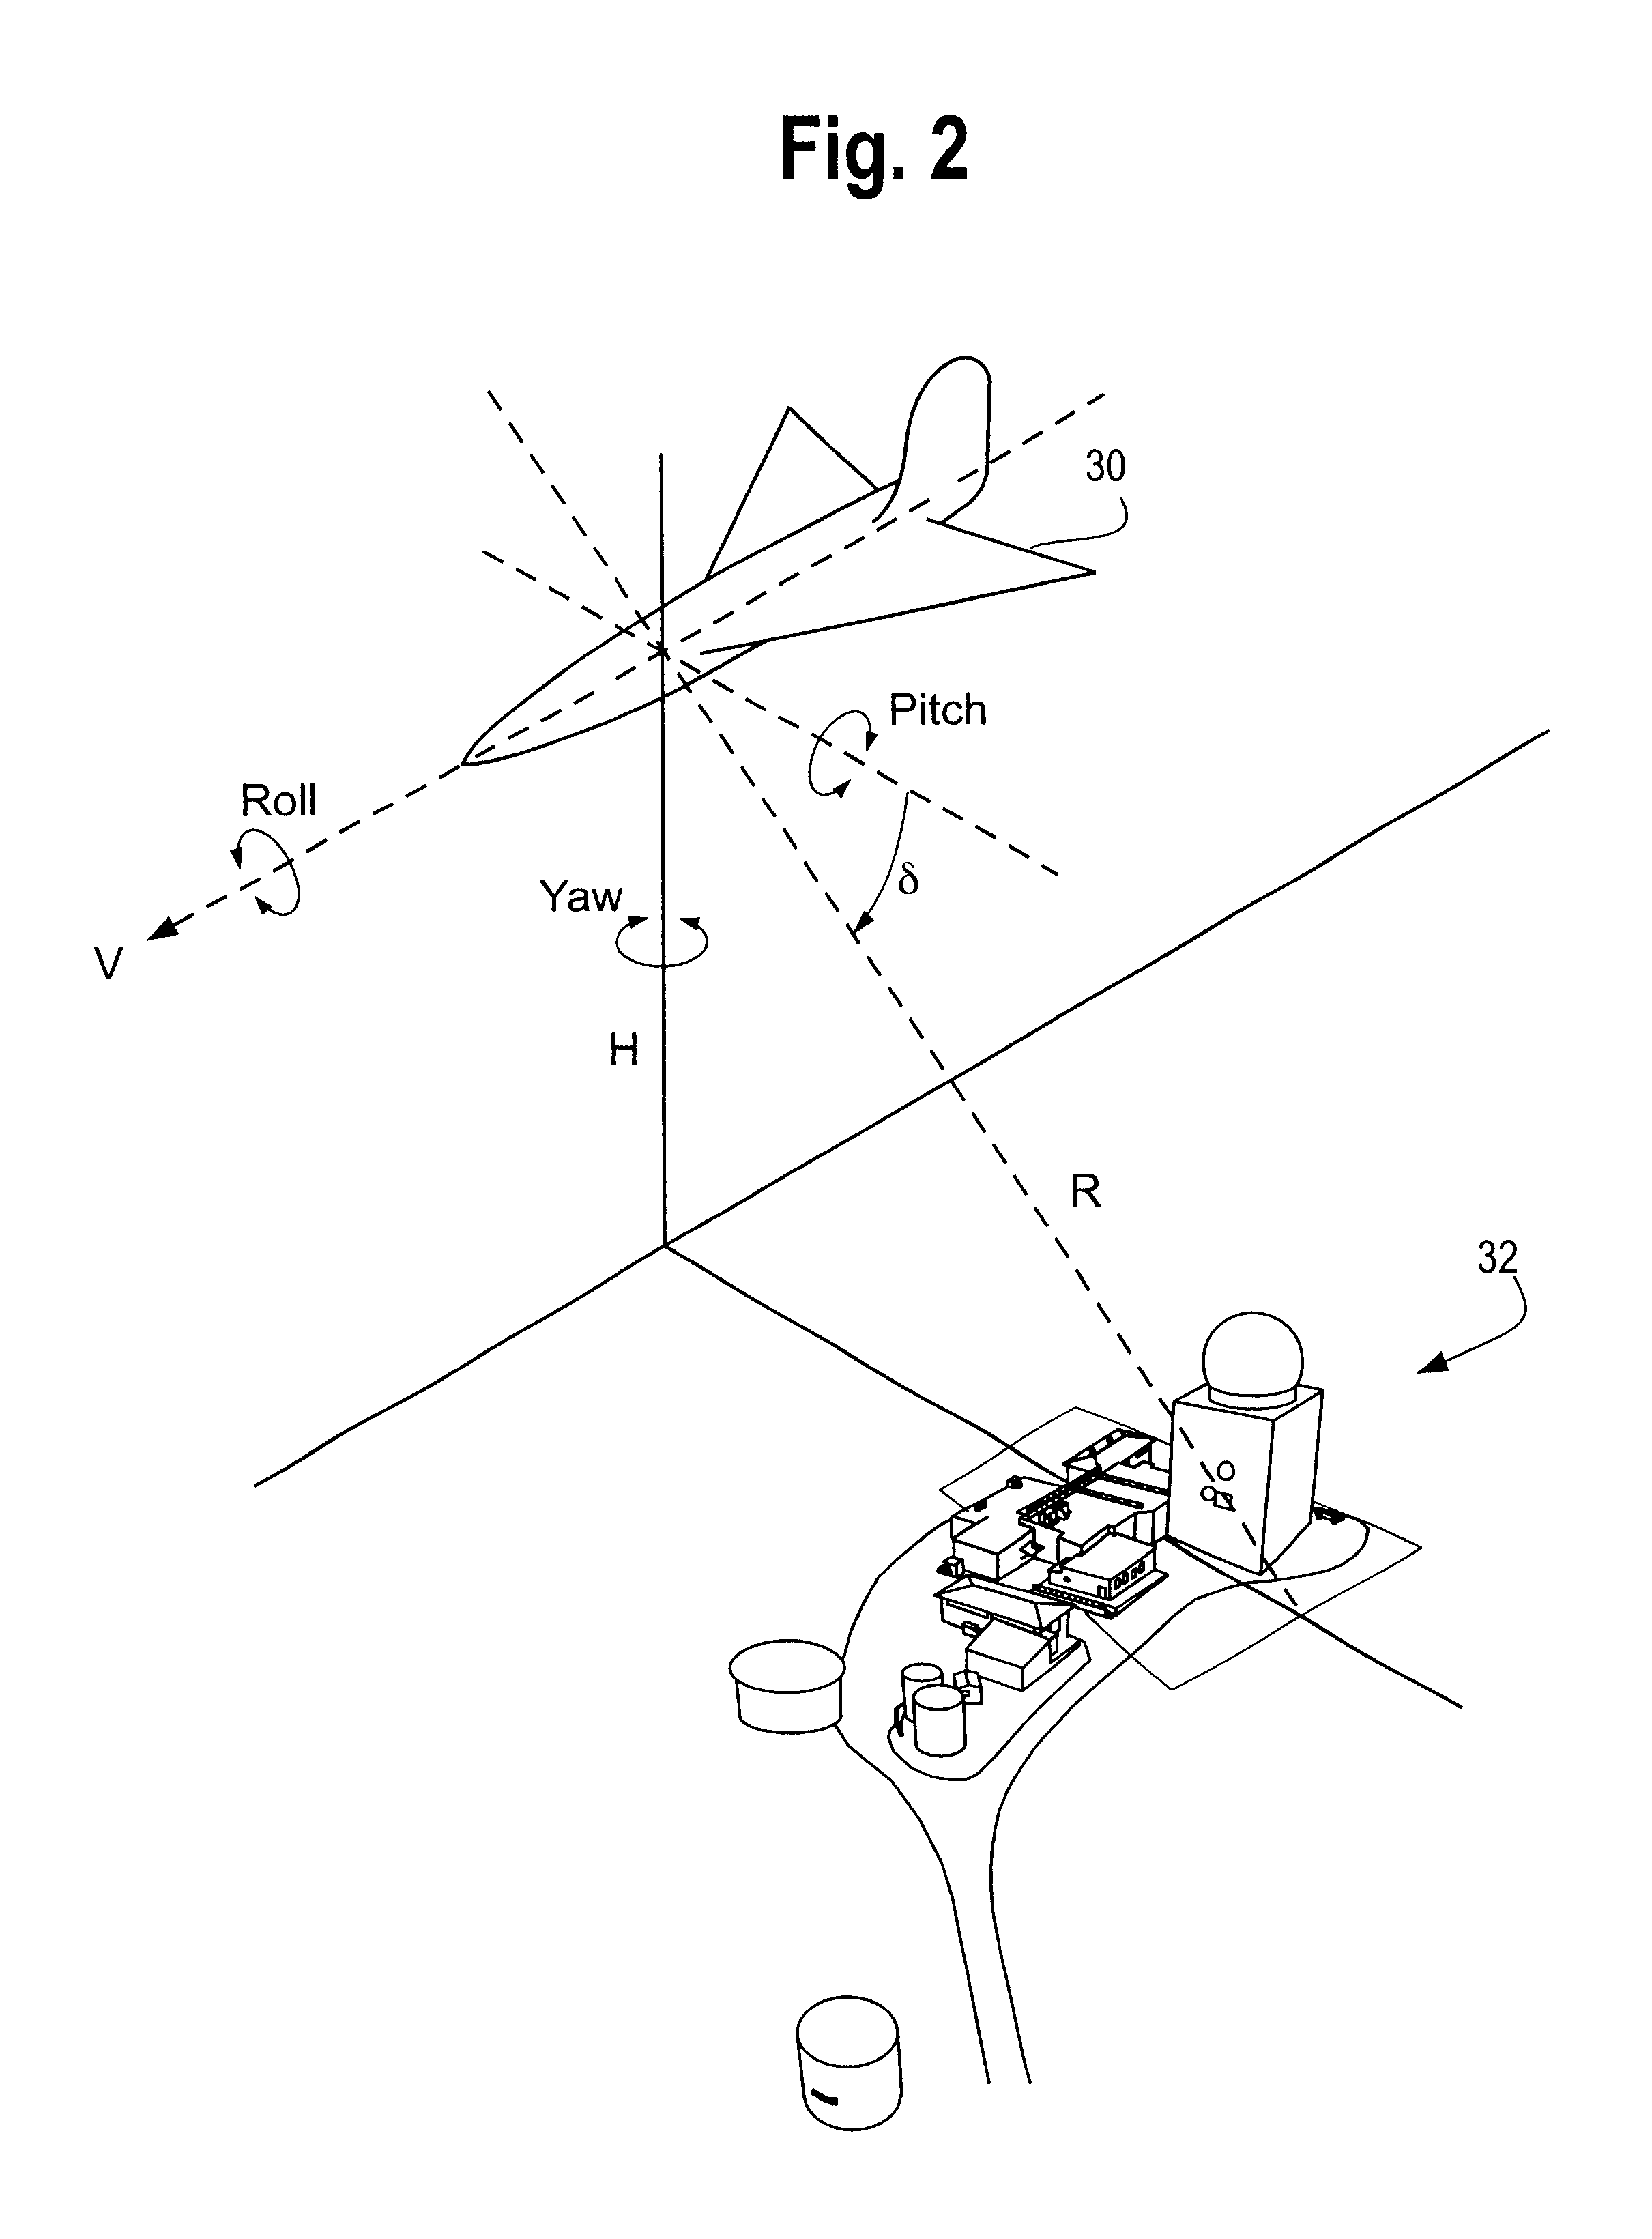 Multispectral or hyperspectral imaging system and method for tactical reconnaissance